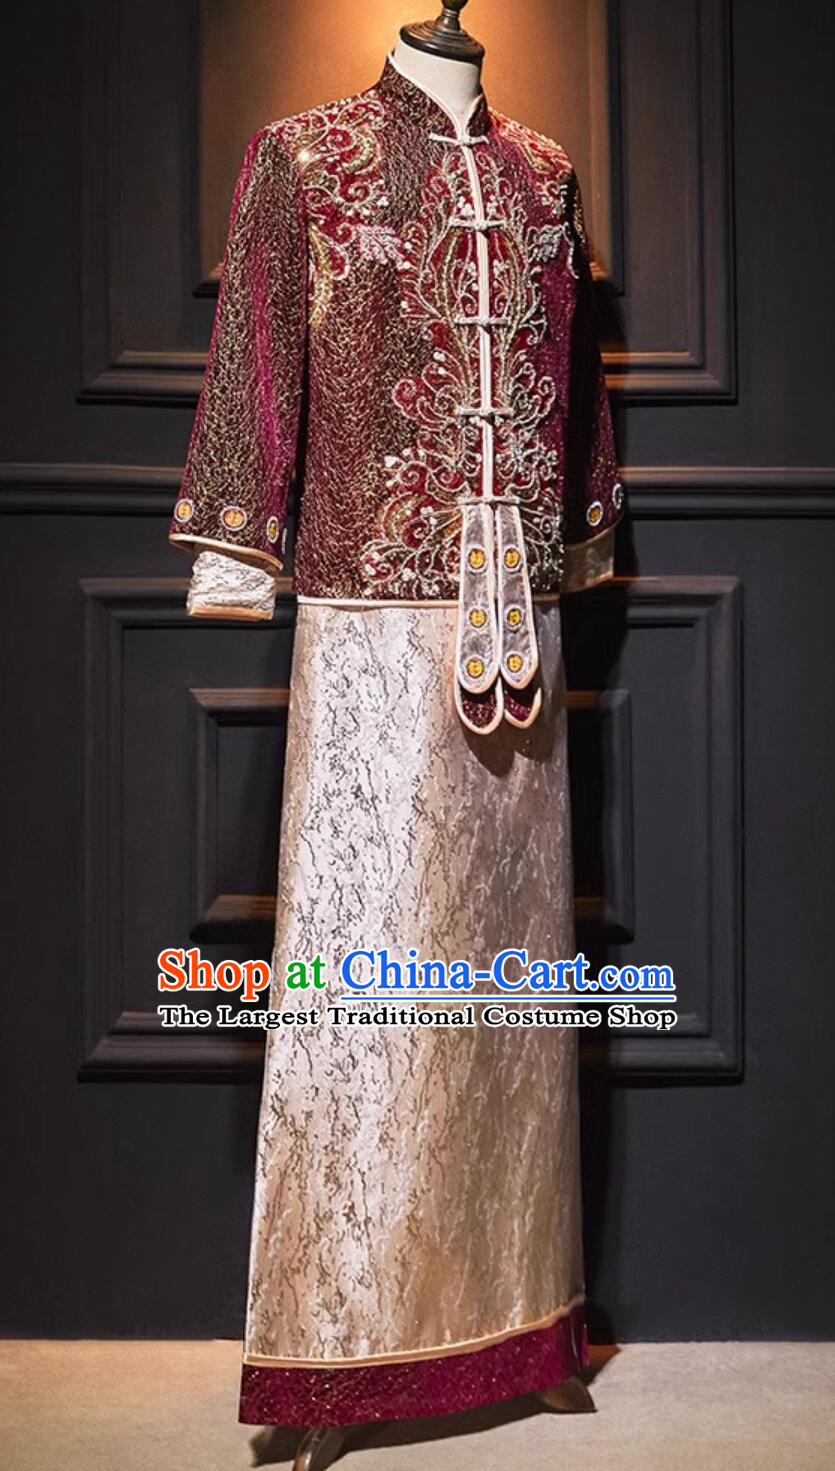 Chinese Ancient Groom Clothing Traditional Wedding Male Outfit Tang Suit Embroidered Mandarin Jacket and Long Robe Complete Set